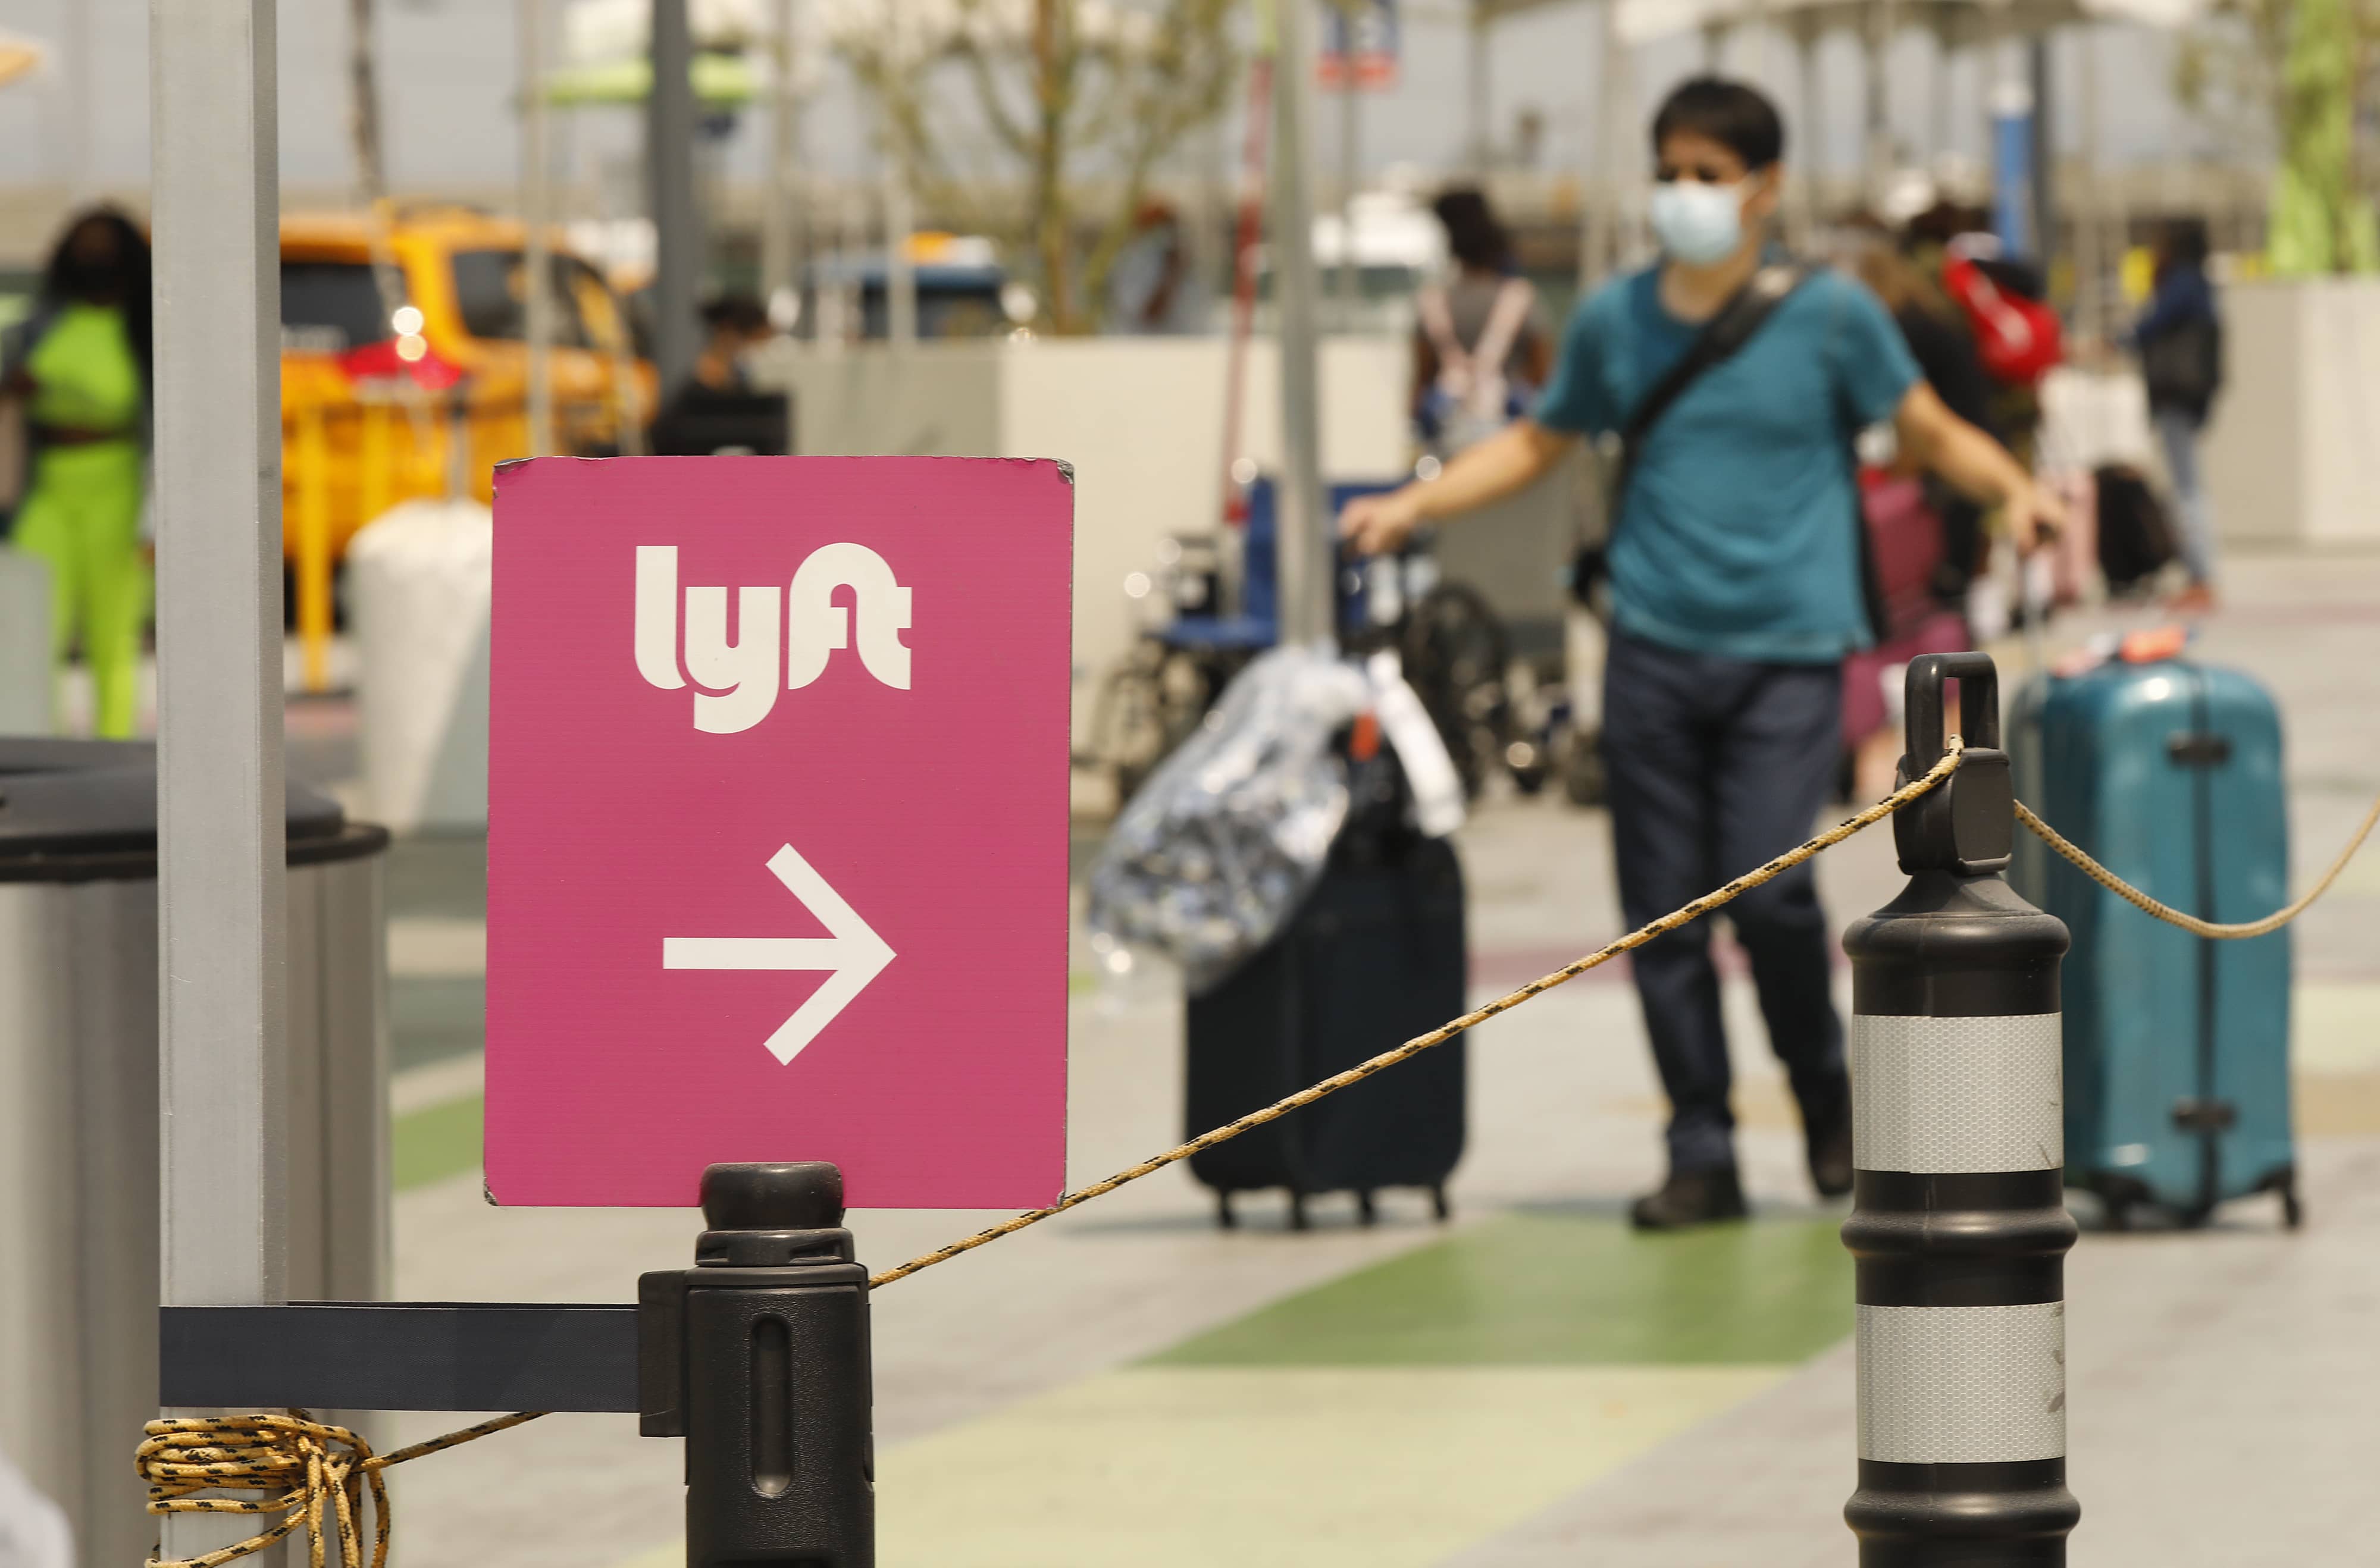 a lyft sign in the foreground and a woman walking with bags in the background